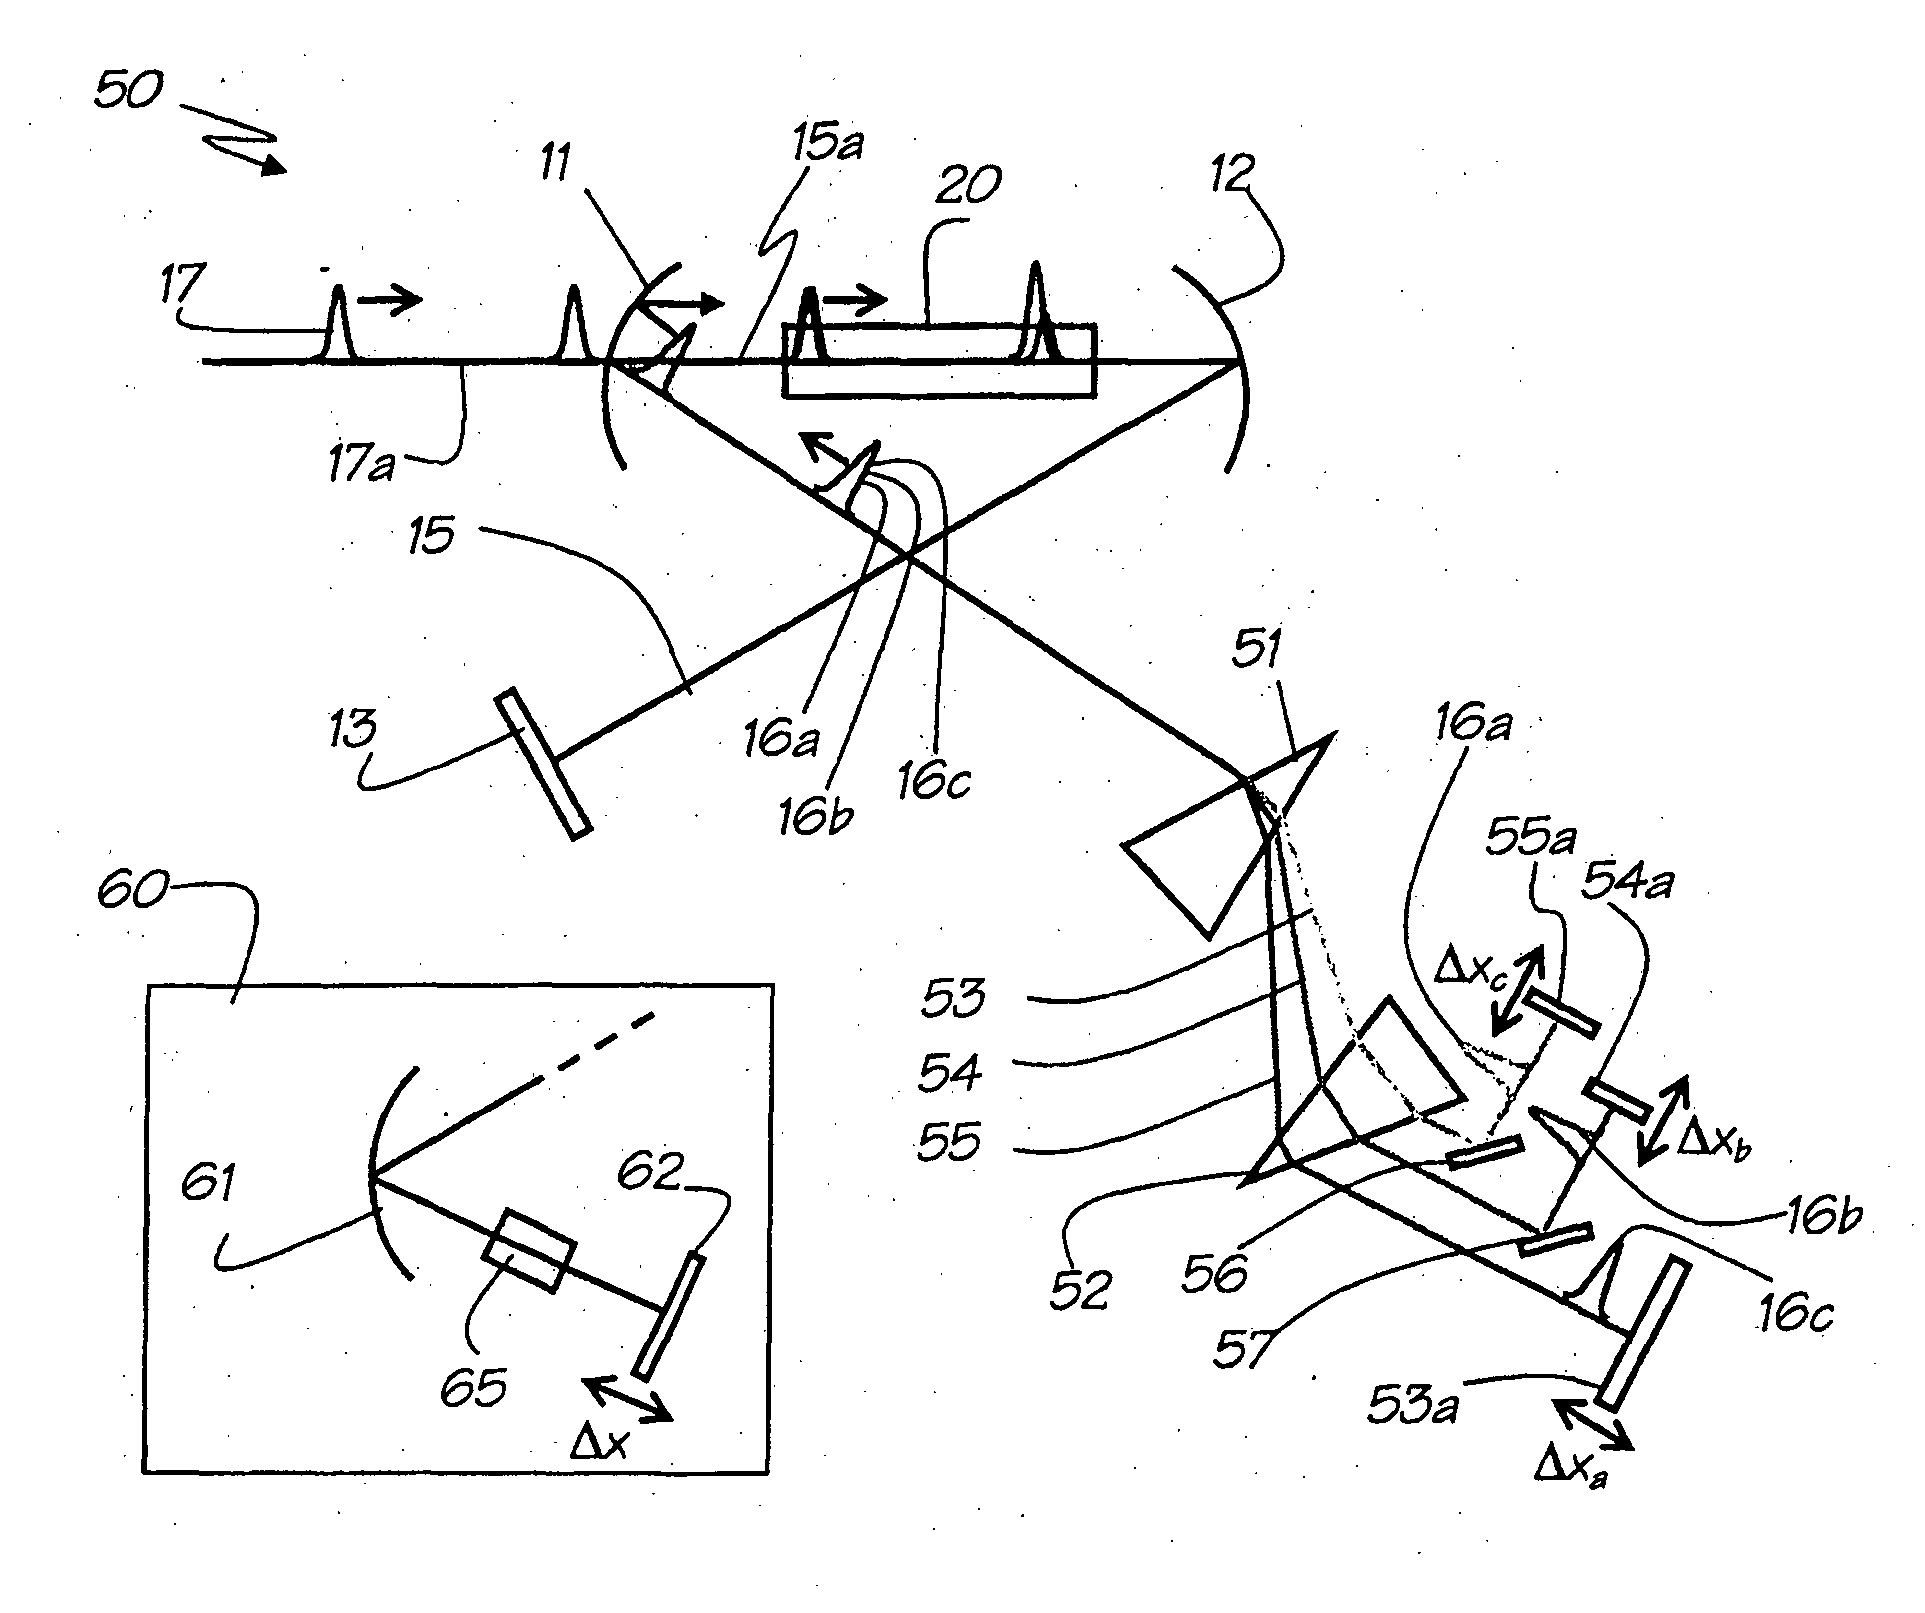 Ultrafast raman laser systems and methods of operation